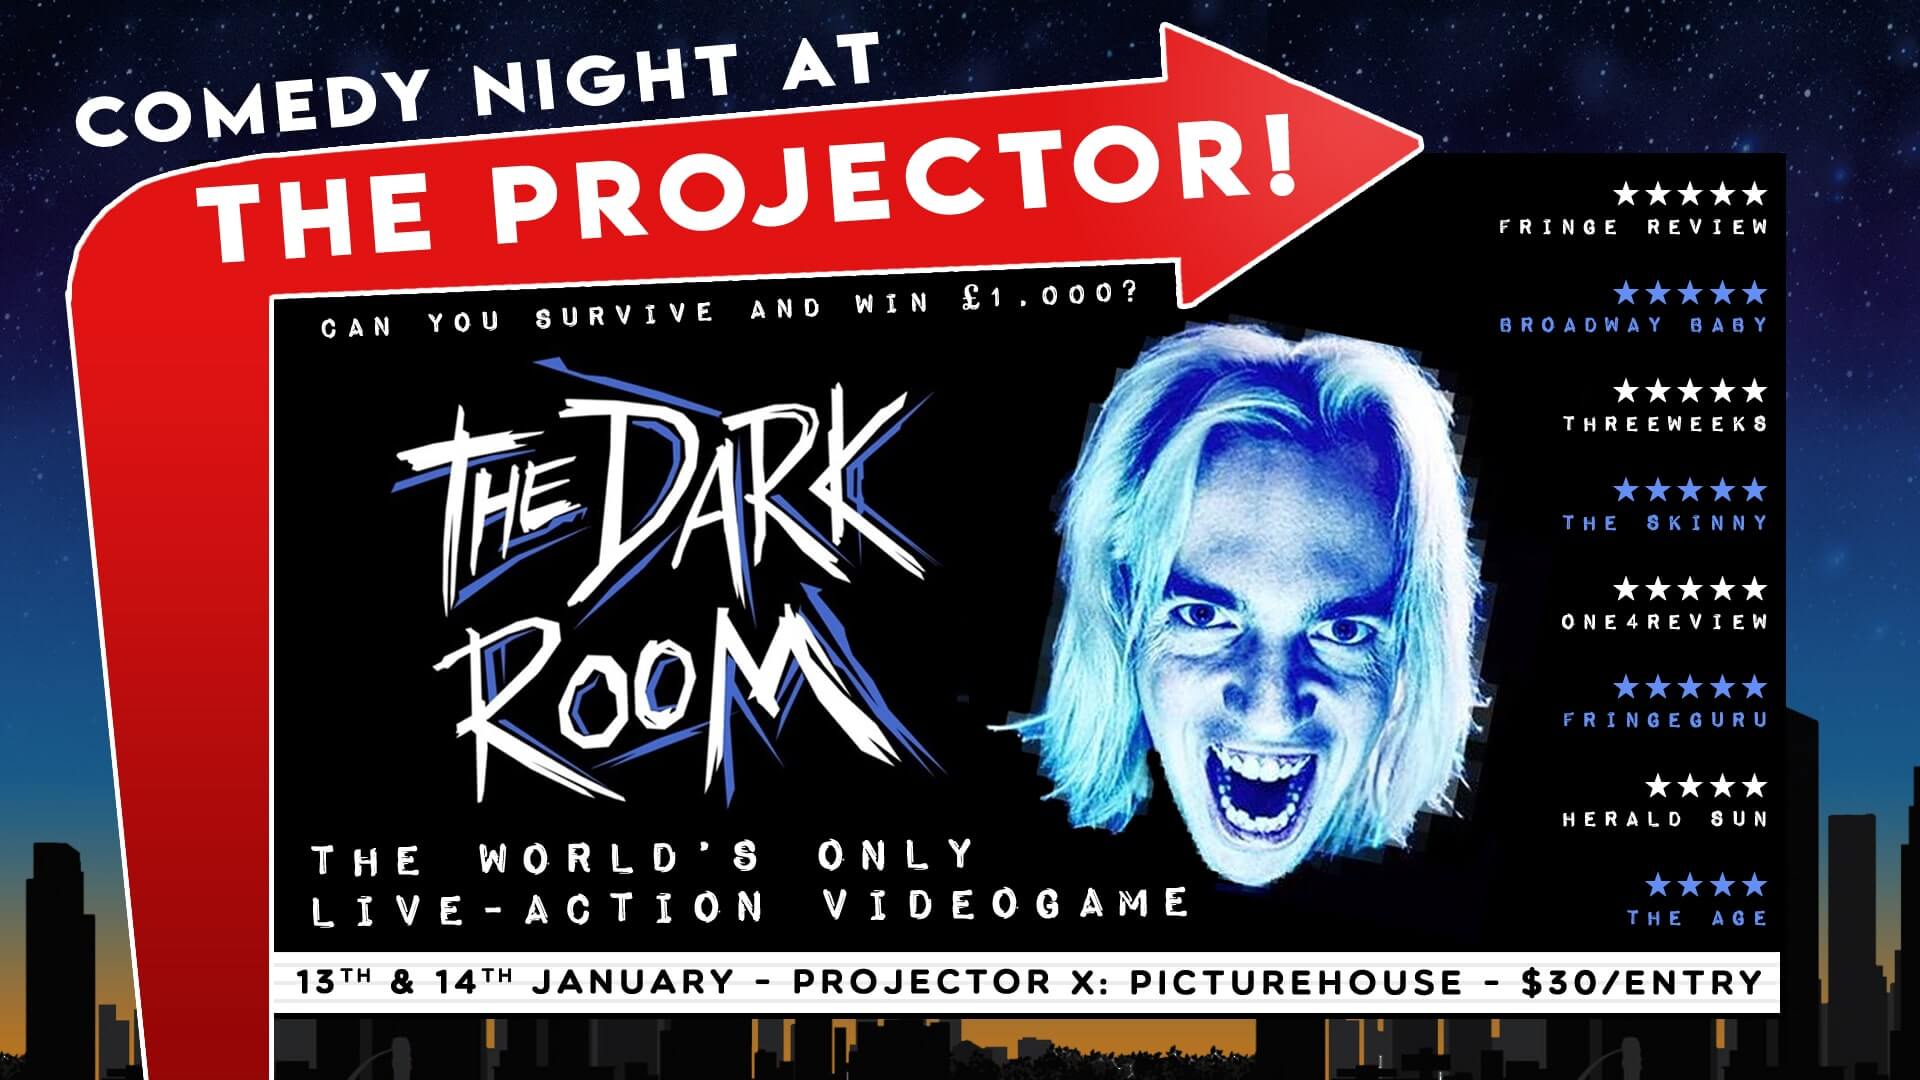 John Robertson’s The Dark Room (Comedy Night at The Projector)